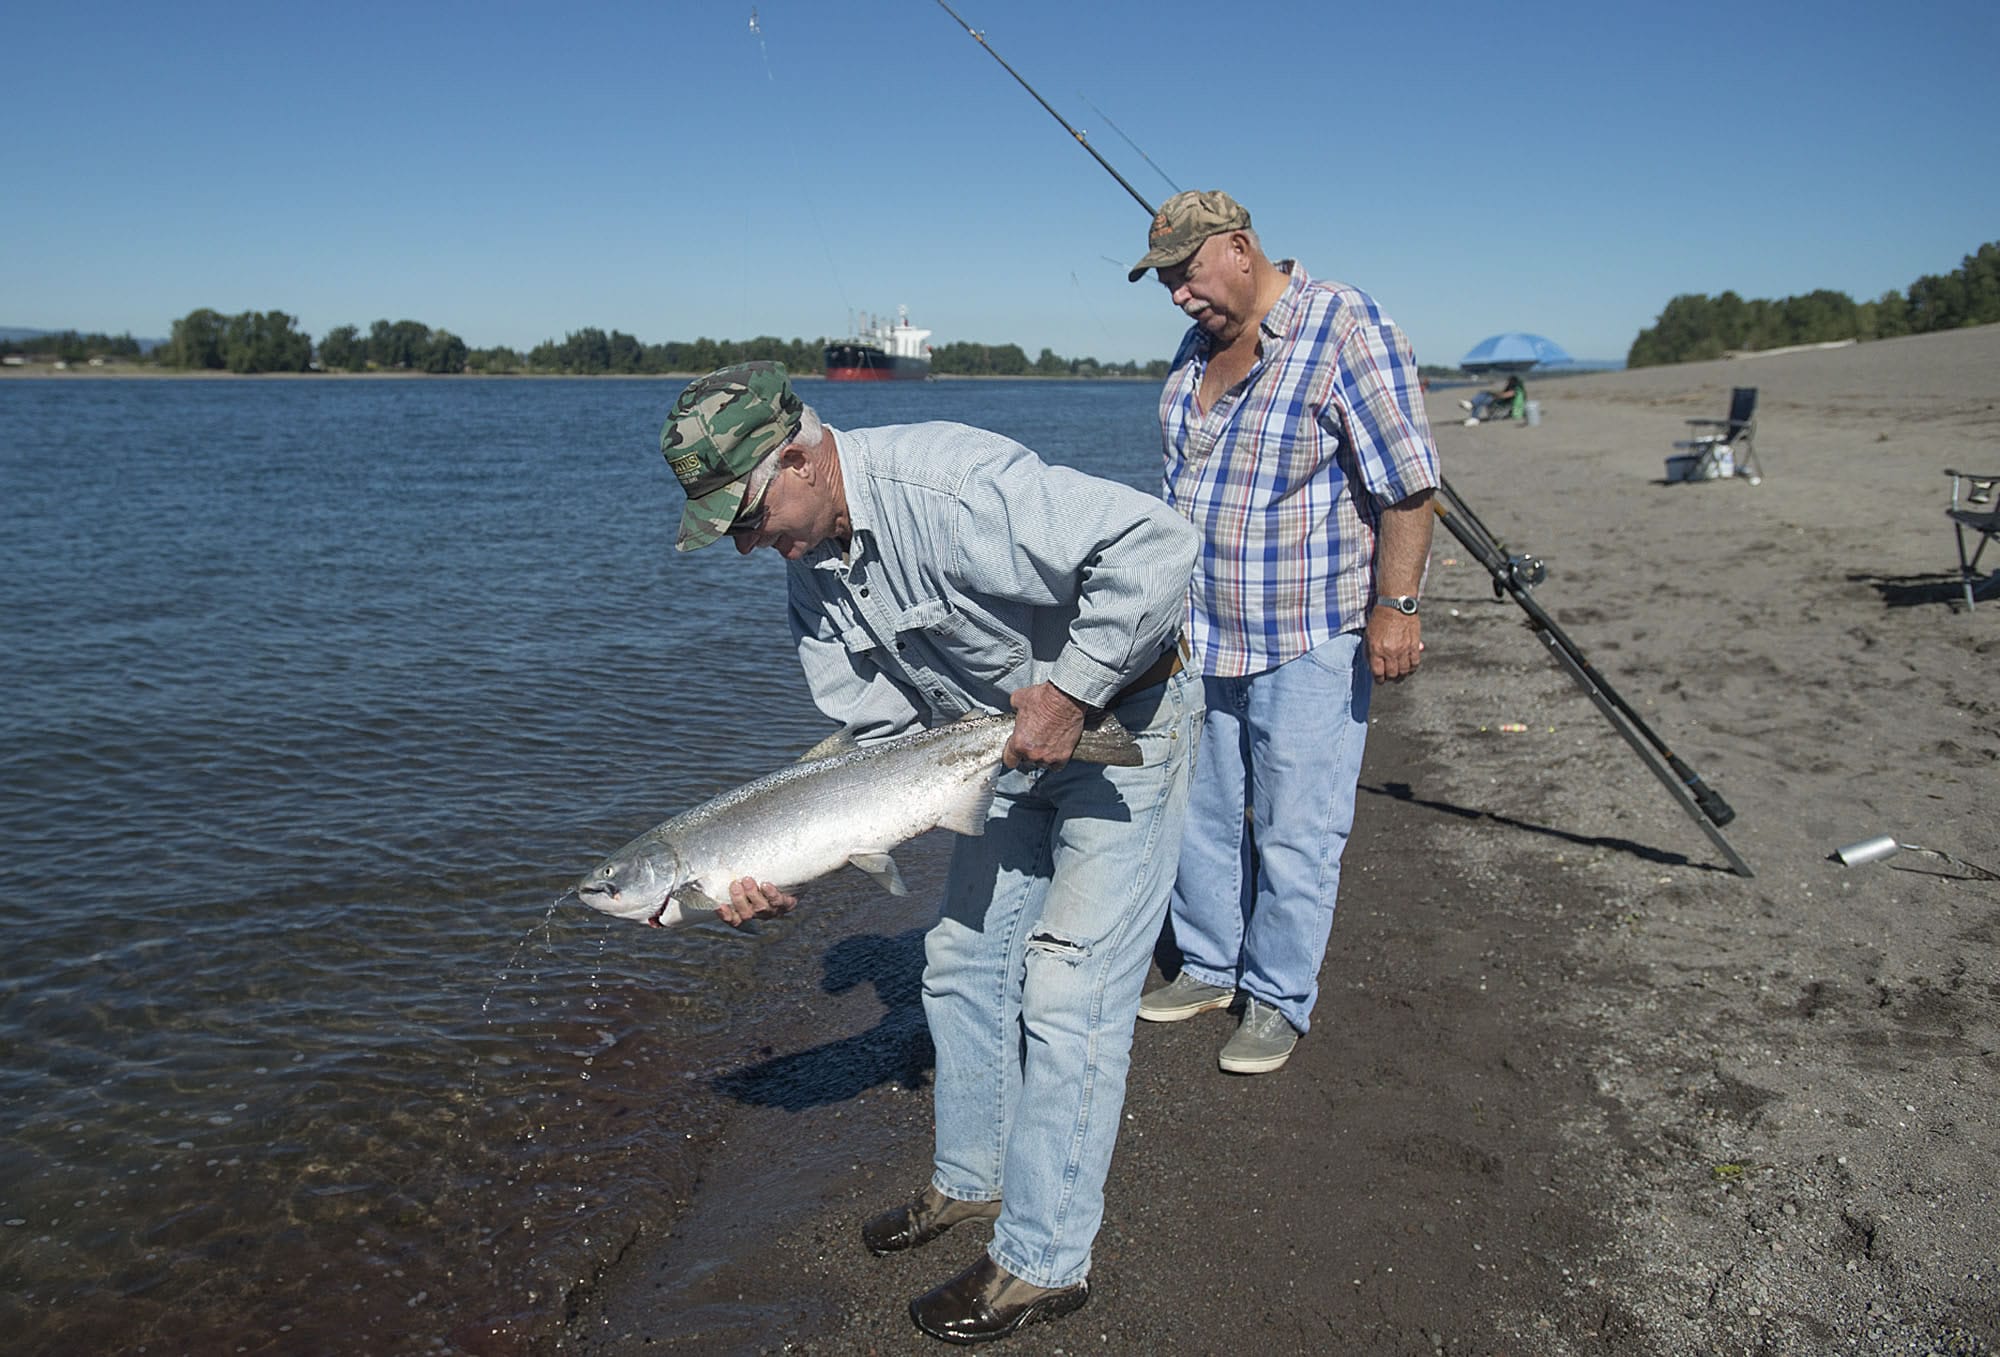 Butch Trunk of Vancouver, left, cleans the Chinook Salmon he caught while assisted by fellow fisherman Marlin Nelson of Hockinson at Frenchman's Bar Regional Park on Tuesday afternoon.